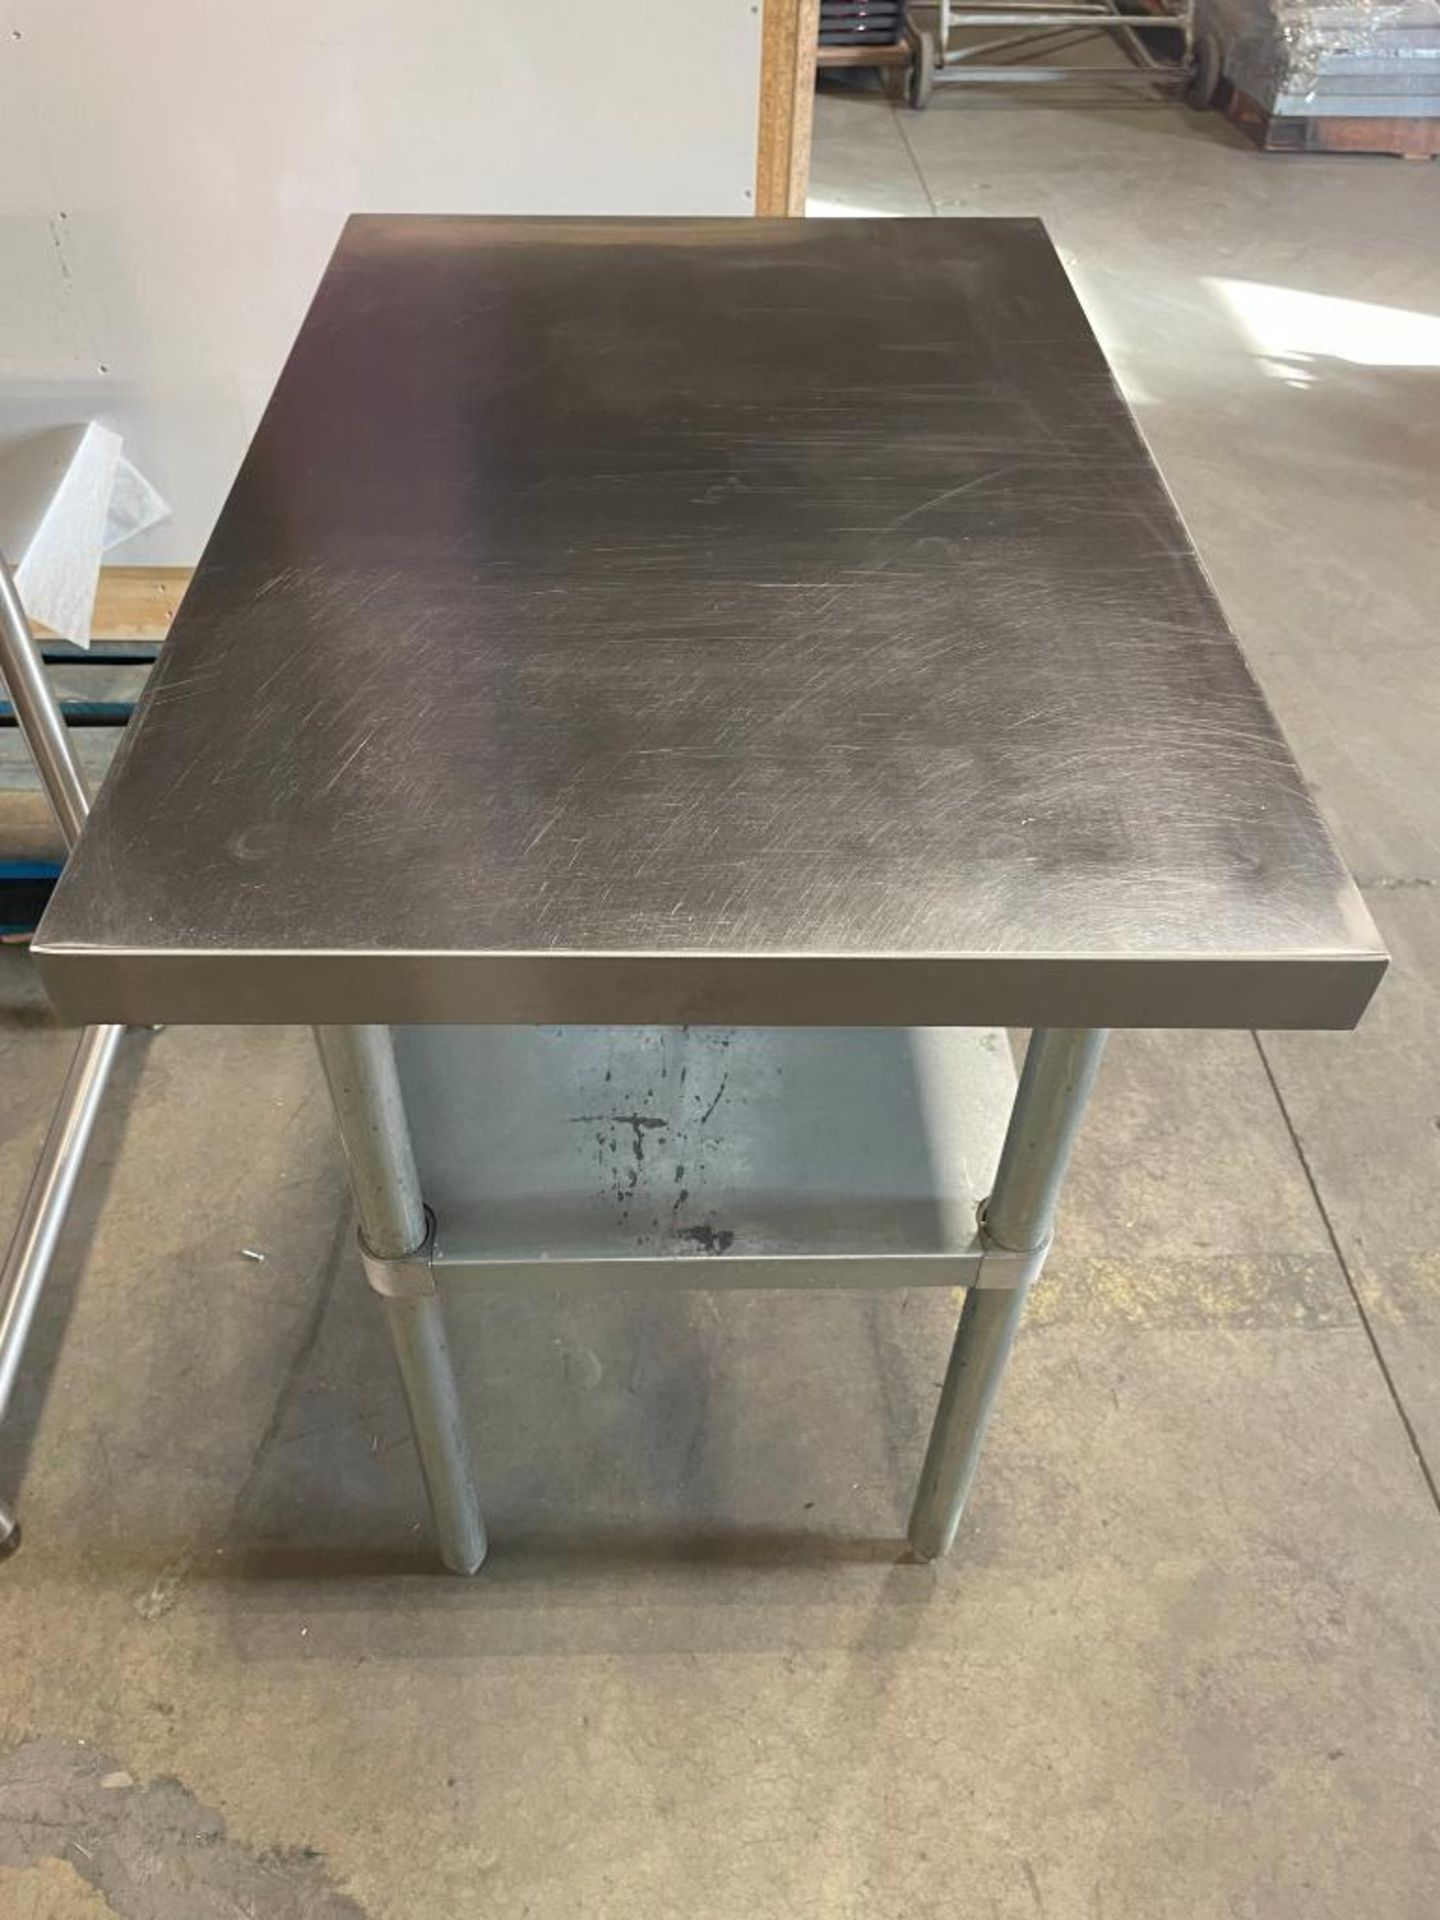 EFI 36" X 24" STAINLESS STEEL WORK TABLE - Image 3 of 6